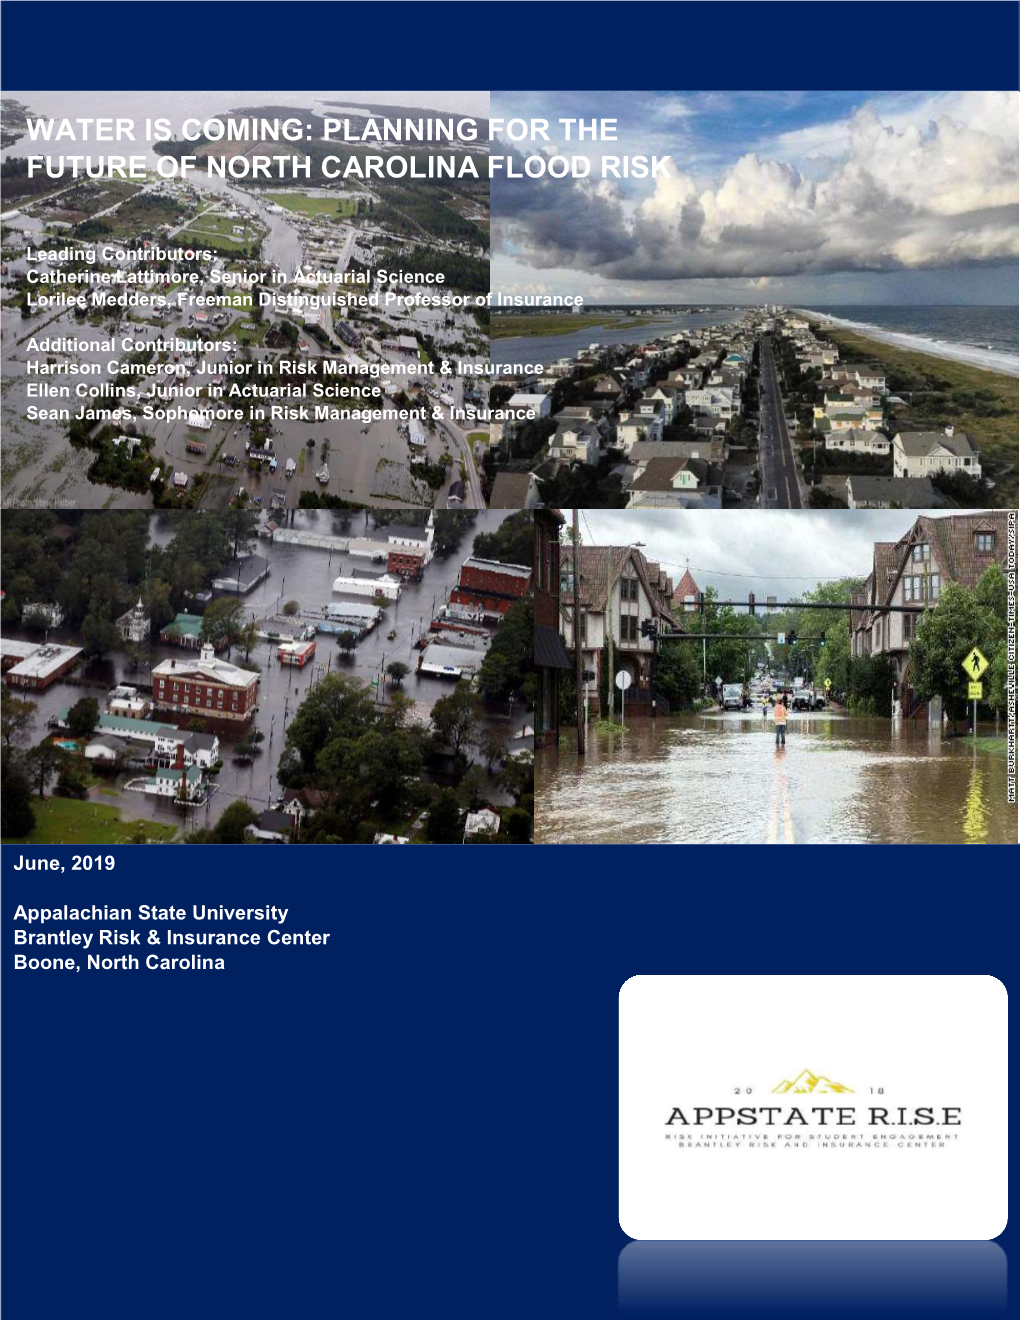 Appstate R.I.S.E. Flood Report